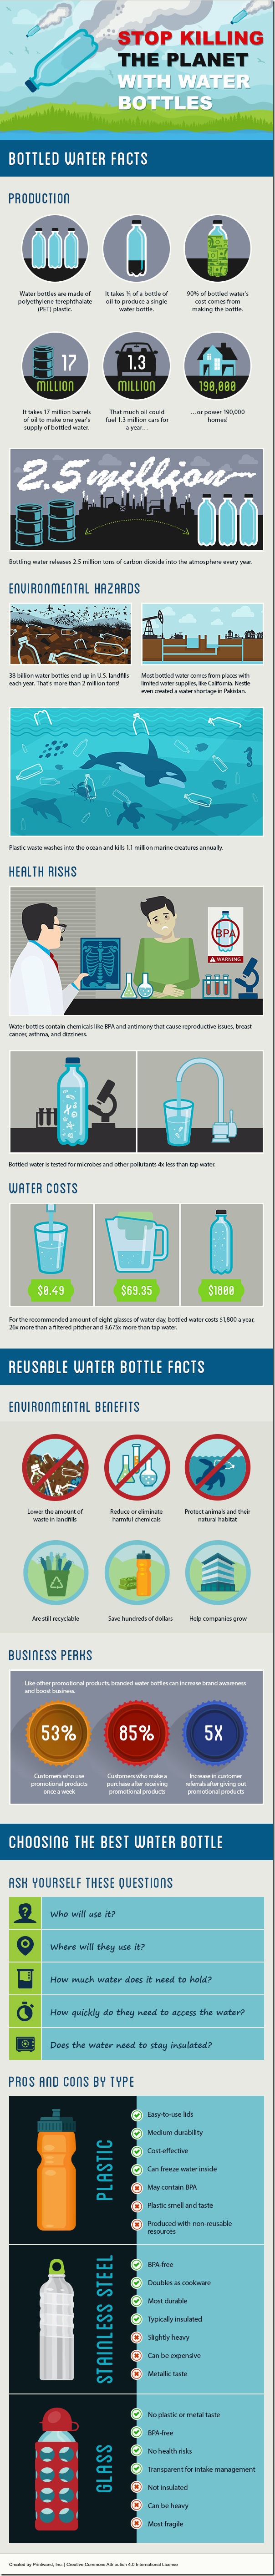 plastic-water-bottle-pollution-infographic-facts-environmental-effects-2